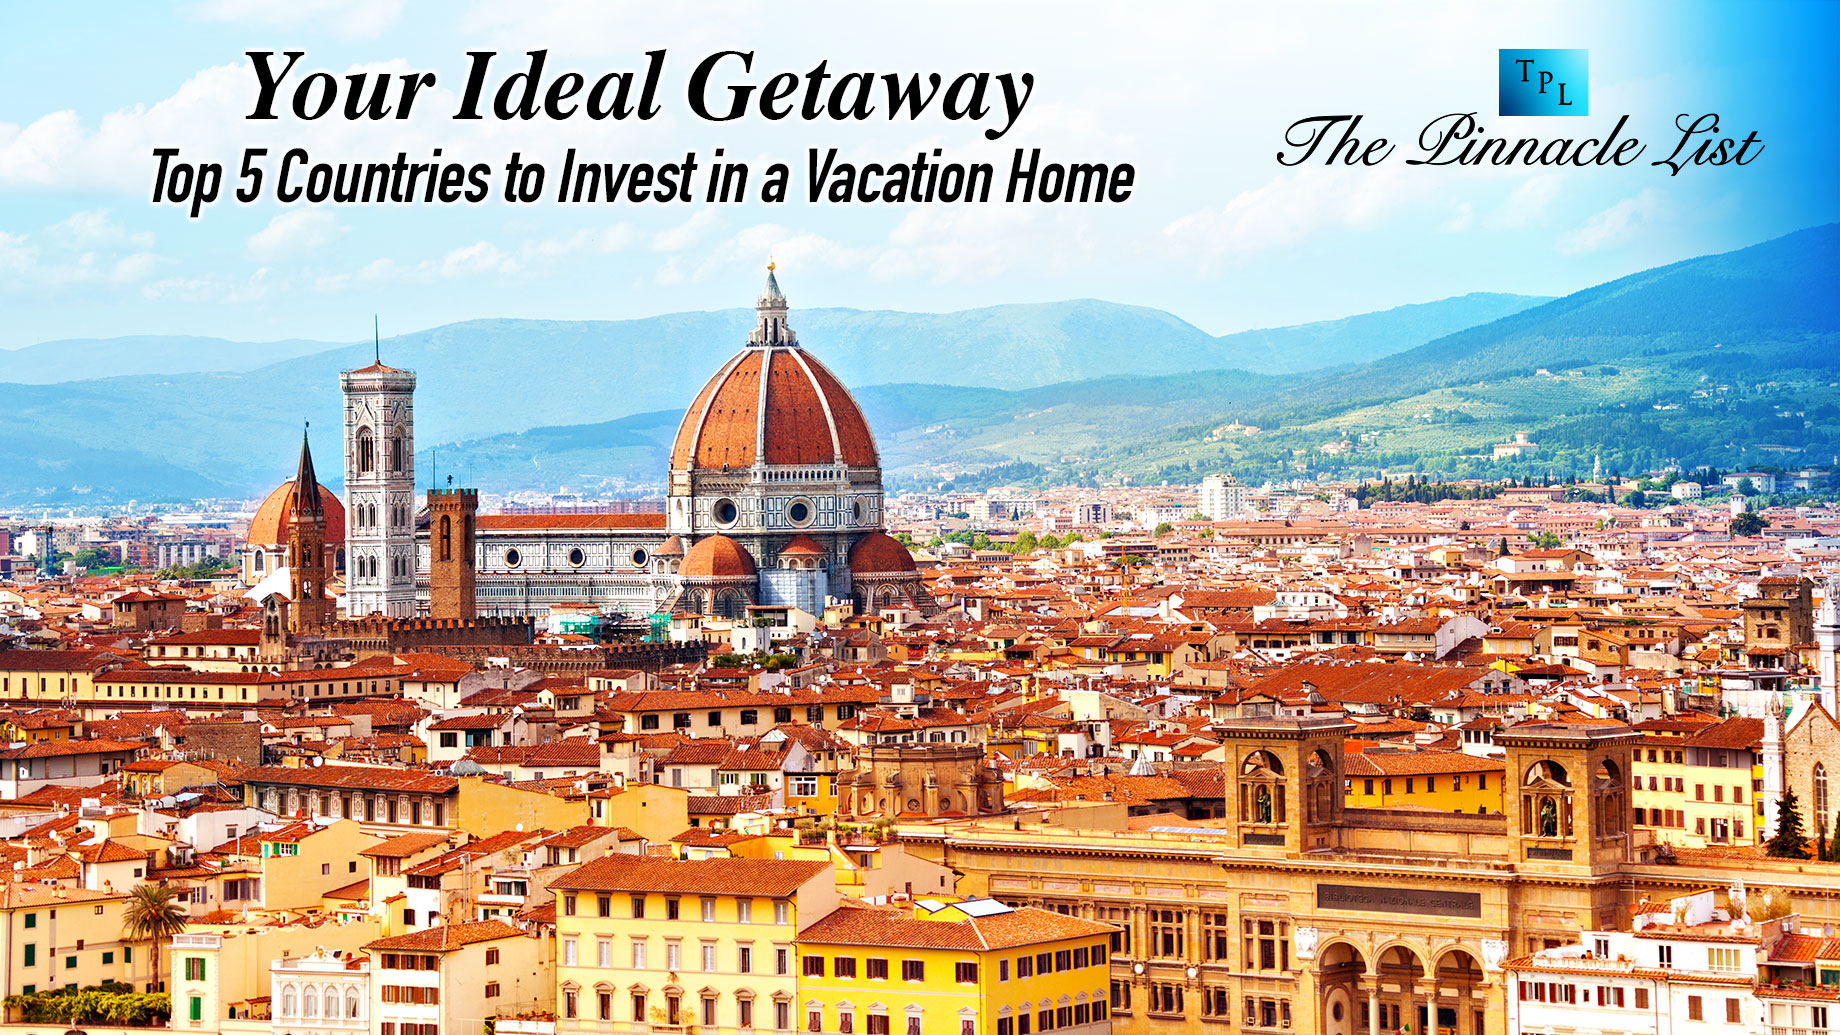 Your Ideal Getaway: Top 5 Countries to Invest in a Vacation Home